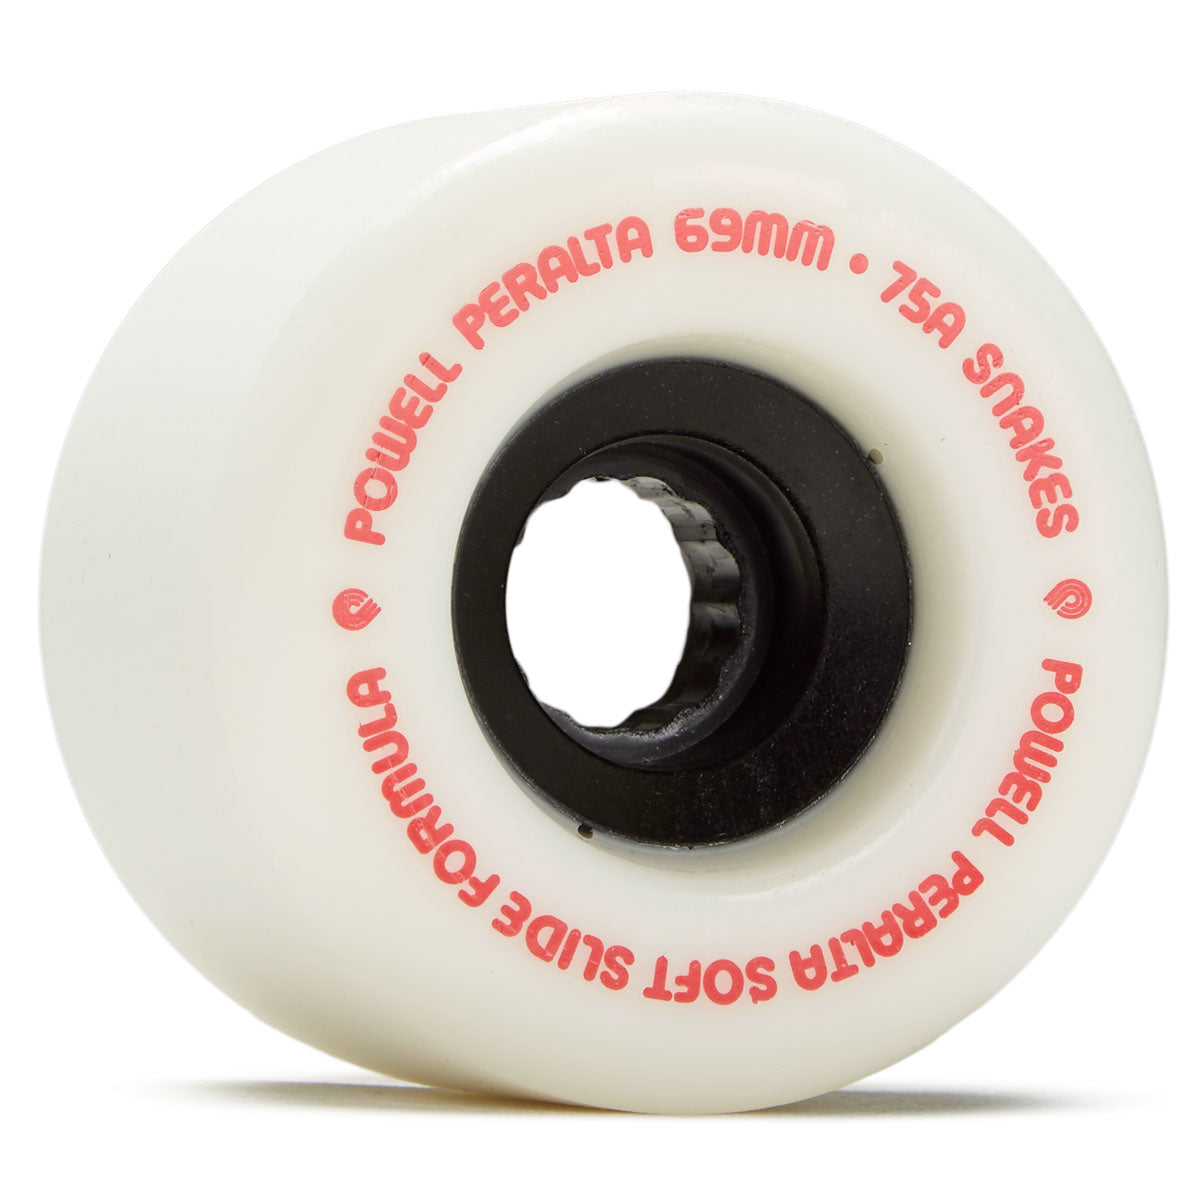 Powell-Peralta Snakes 75A Longboard Wheels - White - 69mm image 1